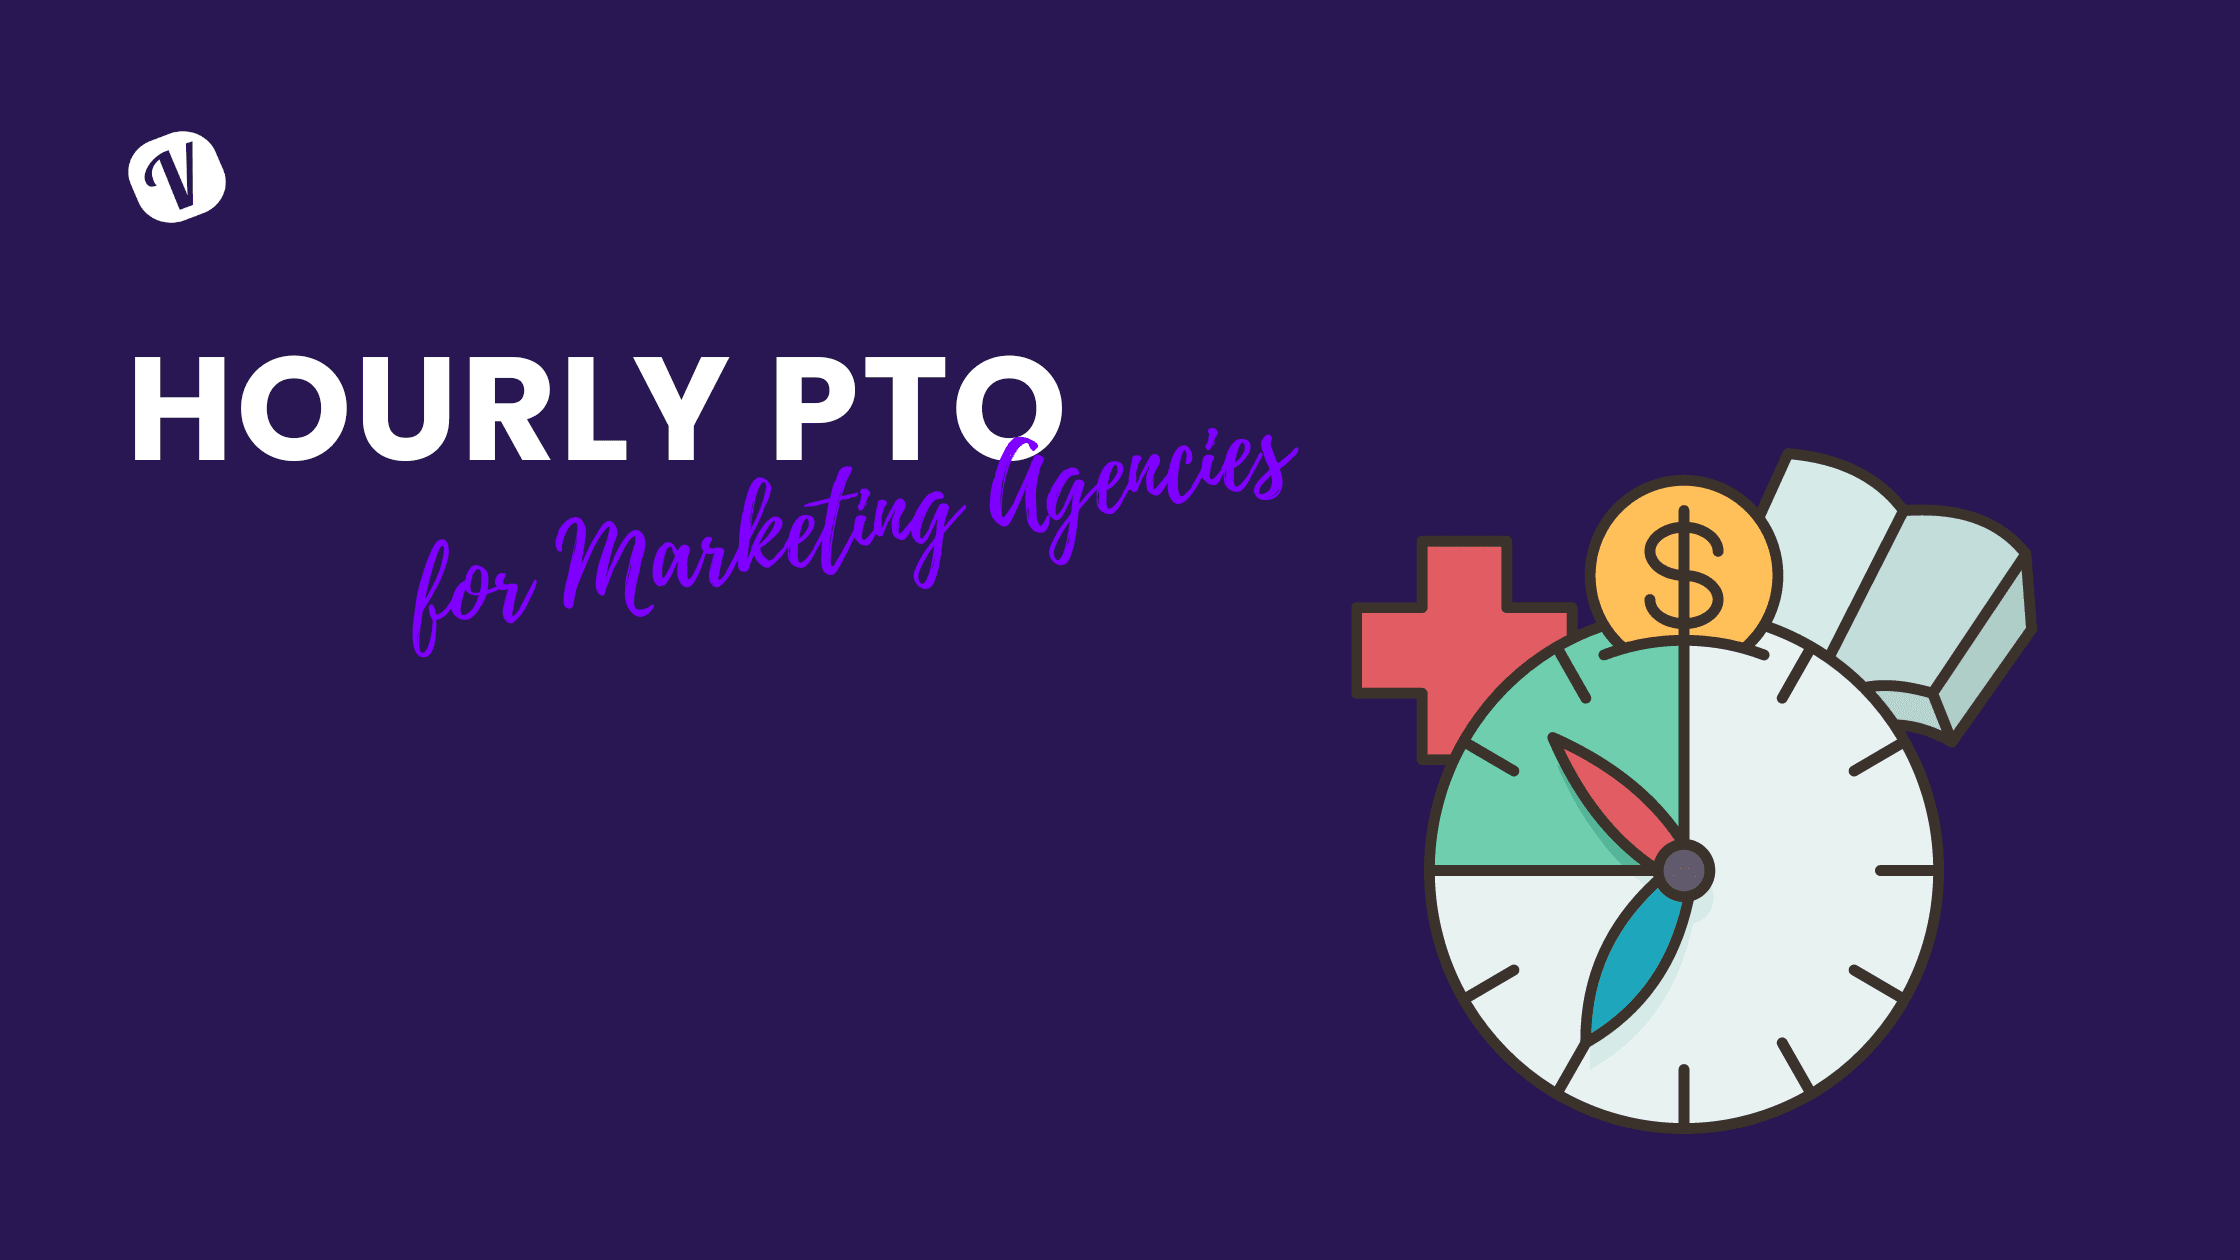 Relevance of Hourly PTO for Marketing Agencies